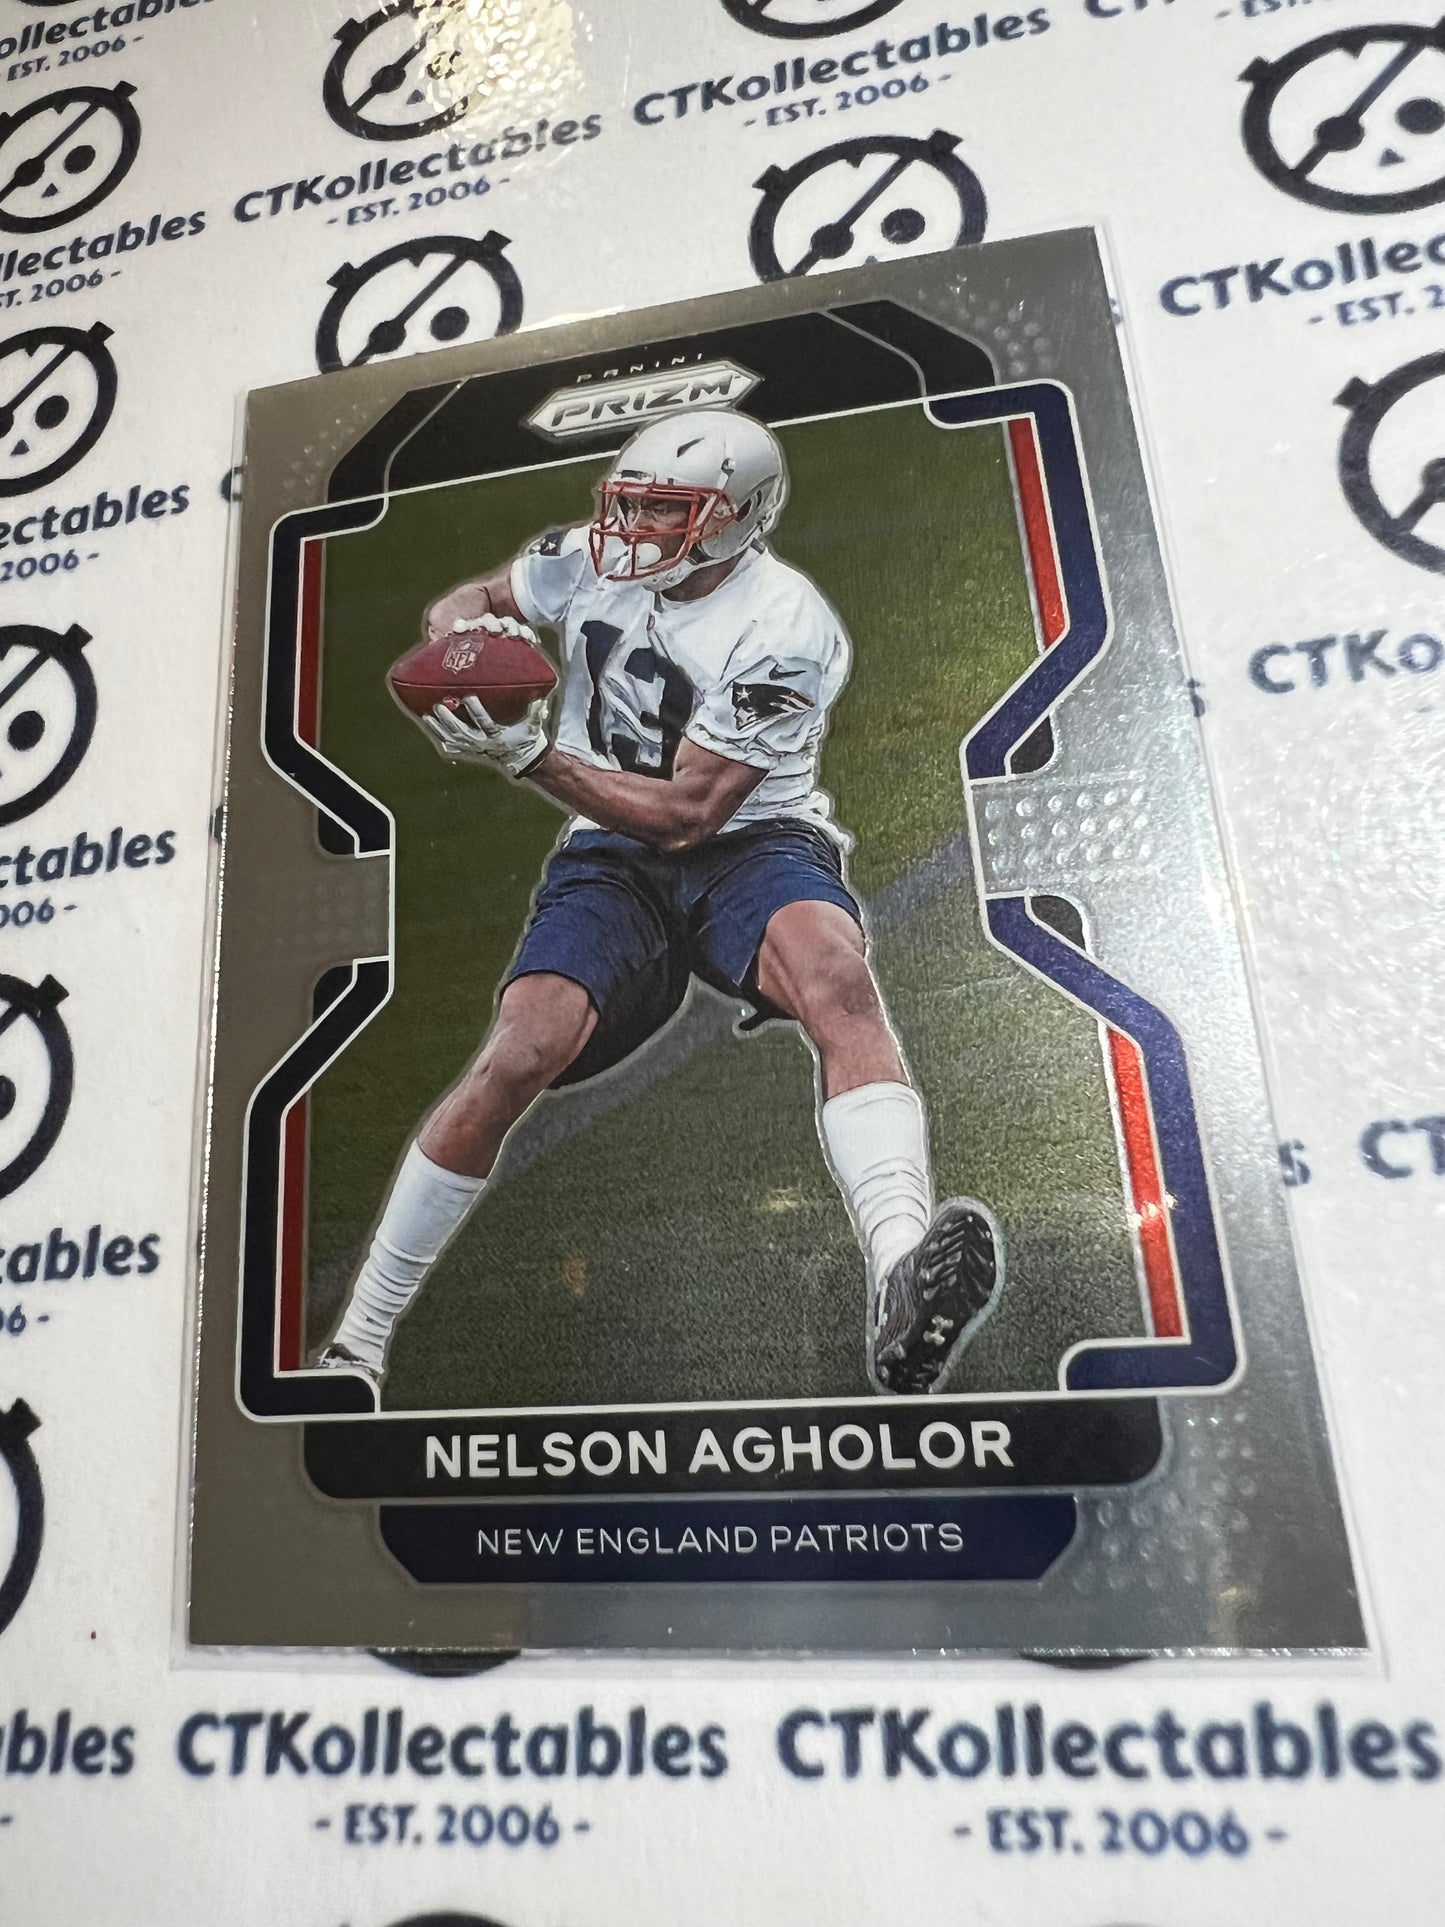 2021 NFL Panini Prizm Base Card #94 Nelson Agholor  New England Patriots